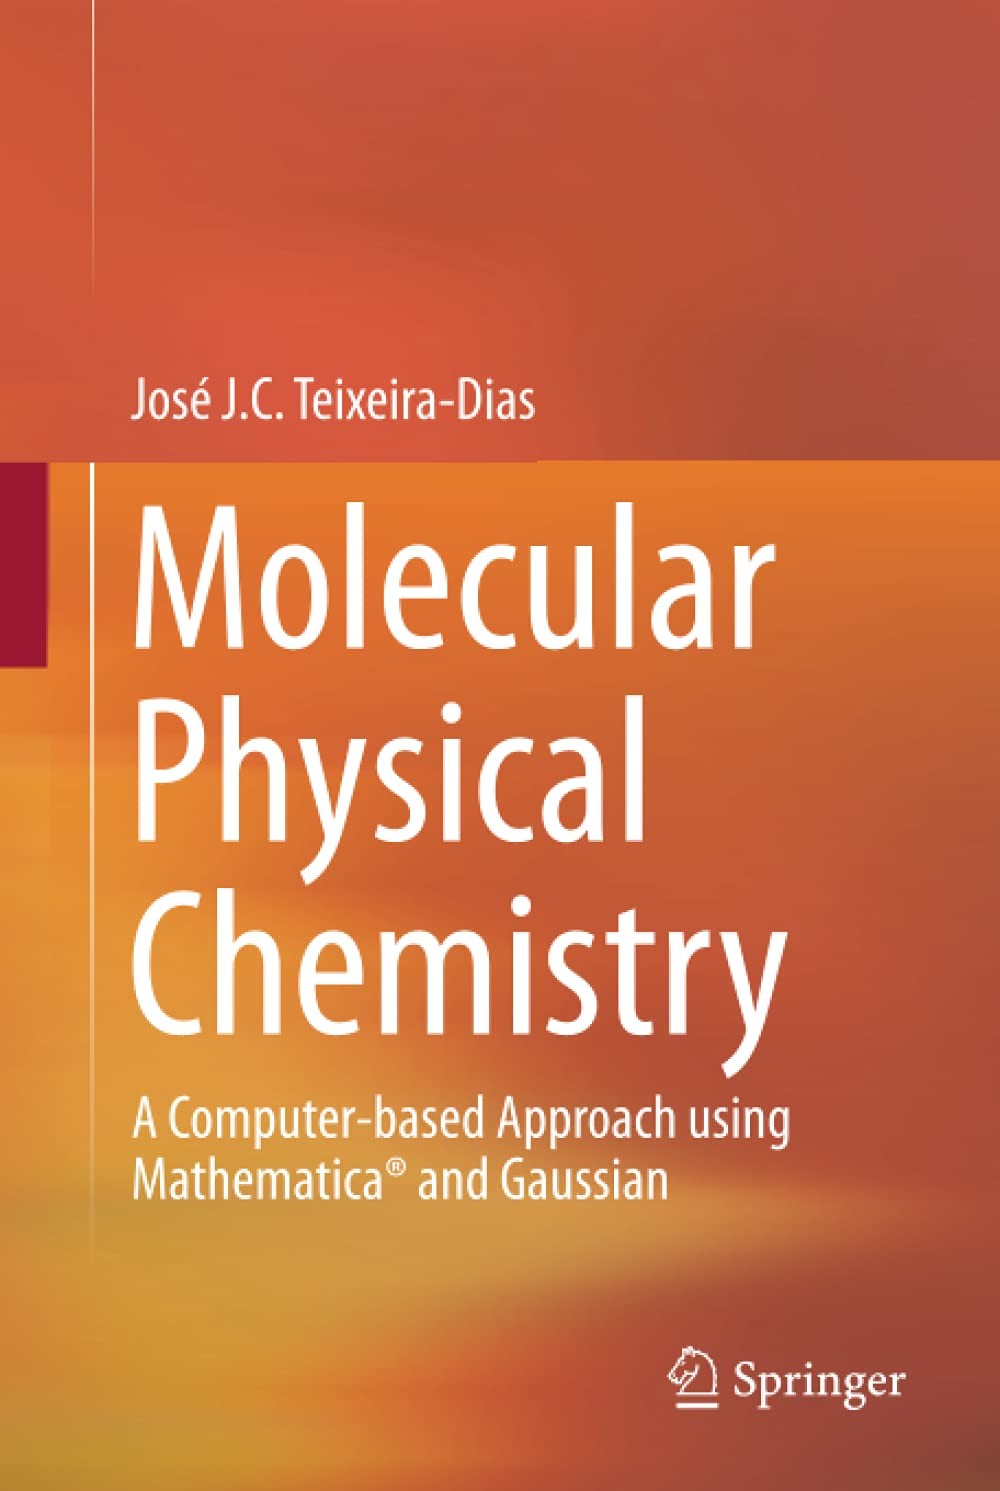 Molecular Physical Chemistry - A Computer-based Approach using Mathematica® and Gaussian